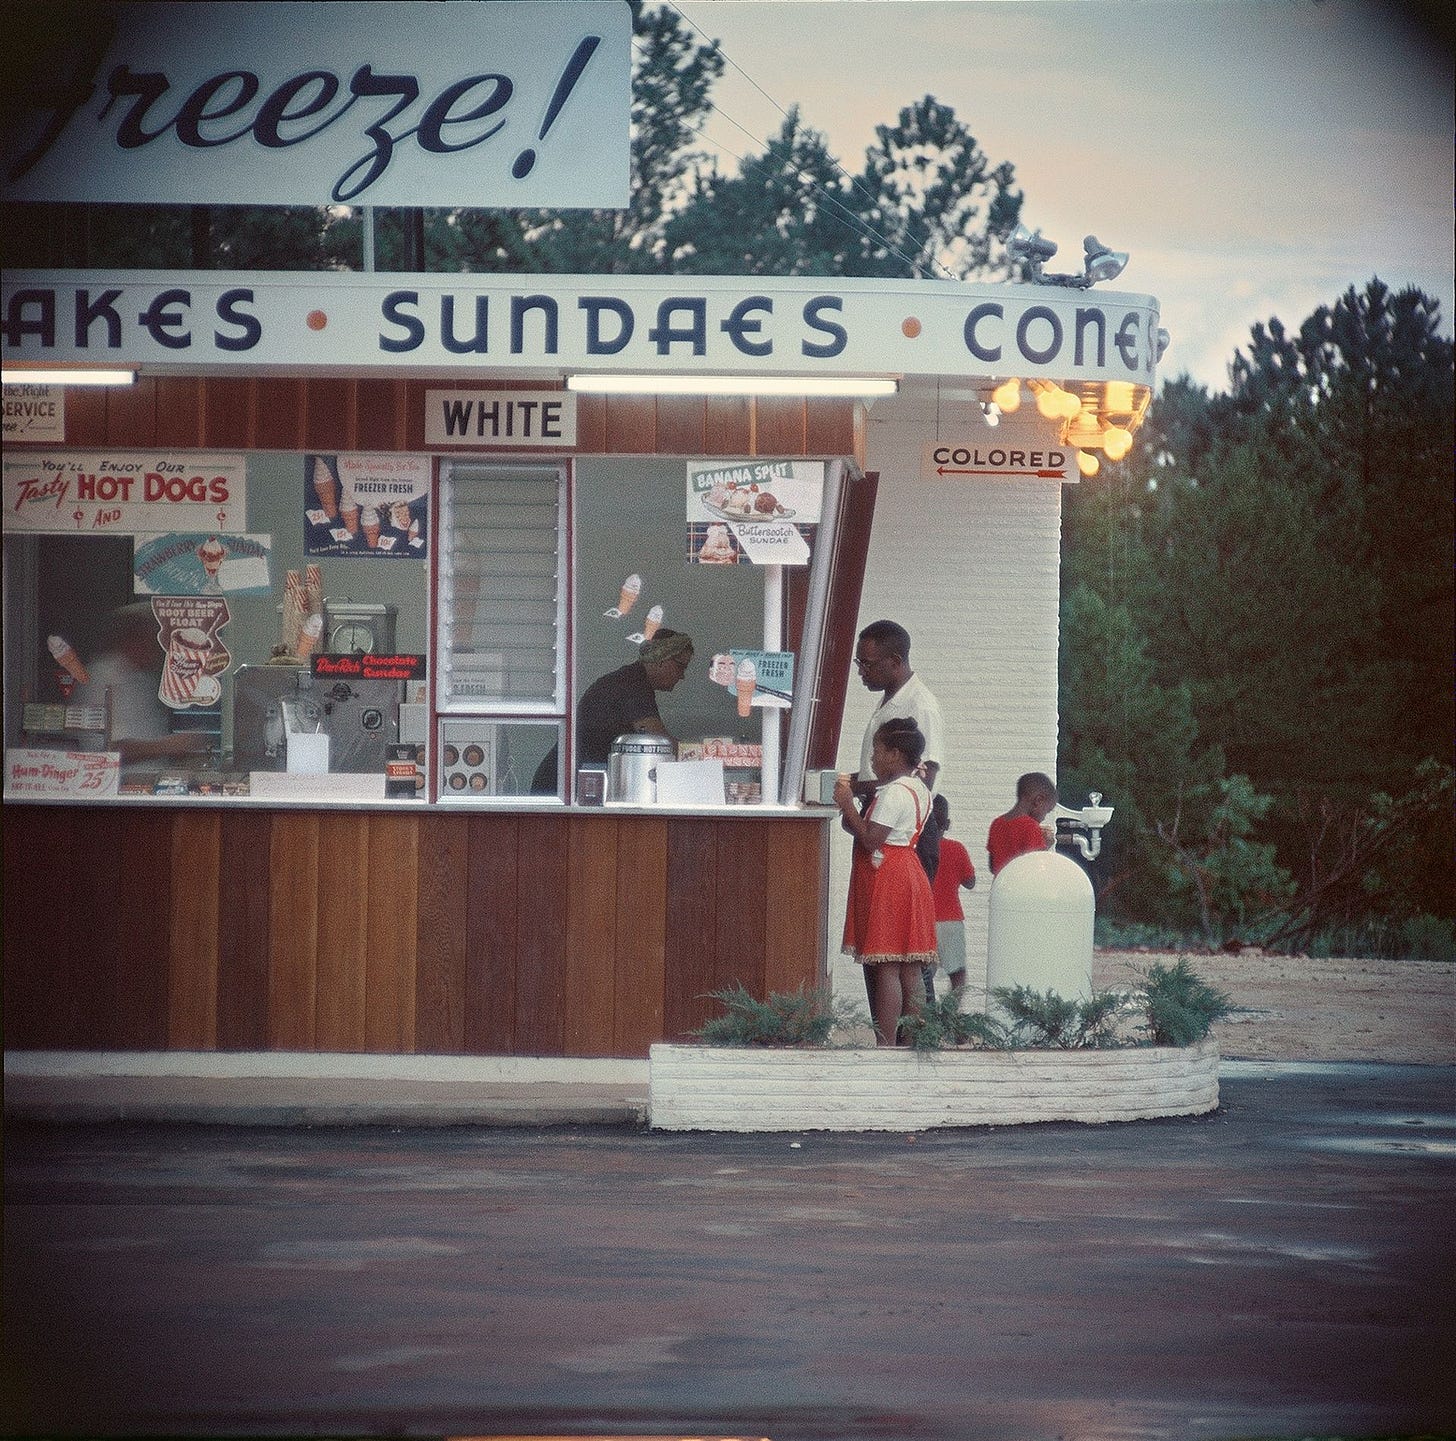 A photo taken in 1950s Alabama showing a Black father with three young children being served at an ice cream counter at a side window labelled “COLORED” by a White woman. The photographer is positioned at a distance showing is a the front of the shop and its main window labelled “WHITE” — demonstrating that this photo was taken at a time when racial segregation was still legal in the United States.